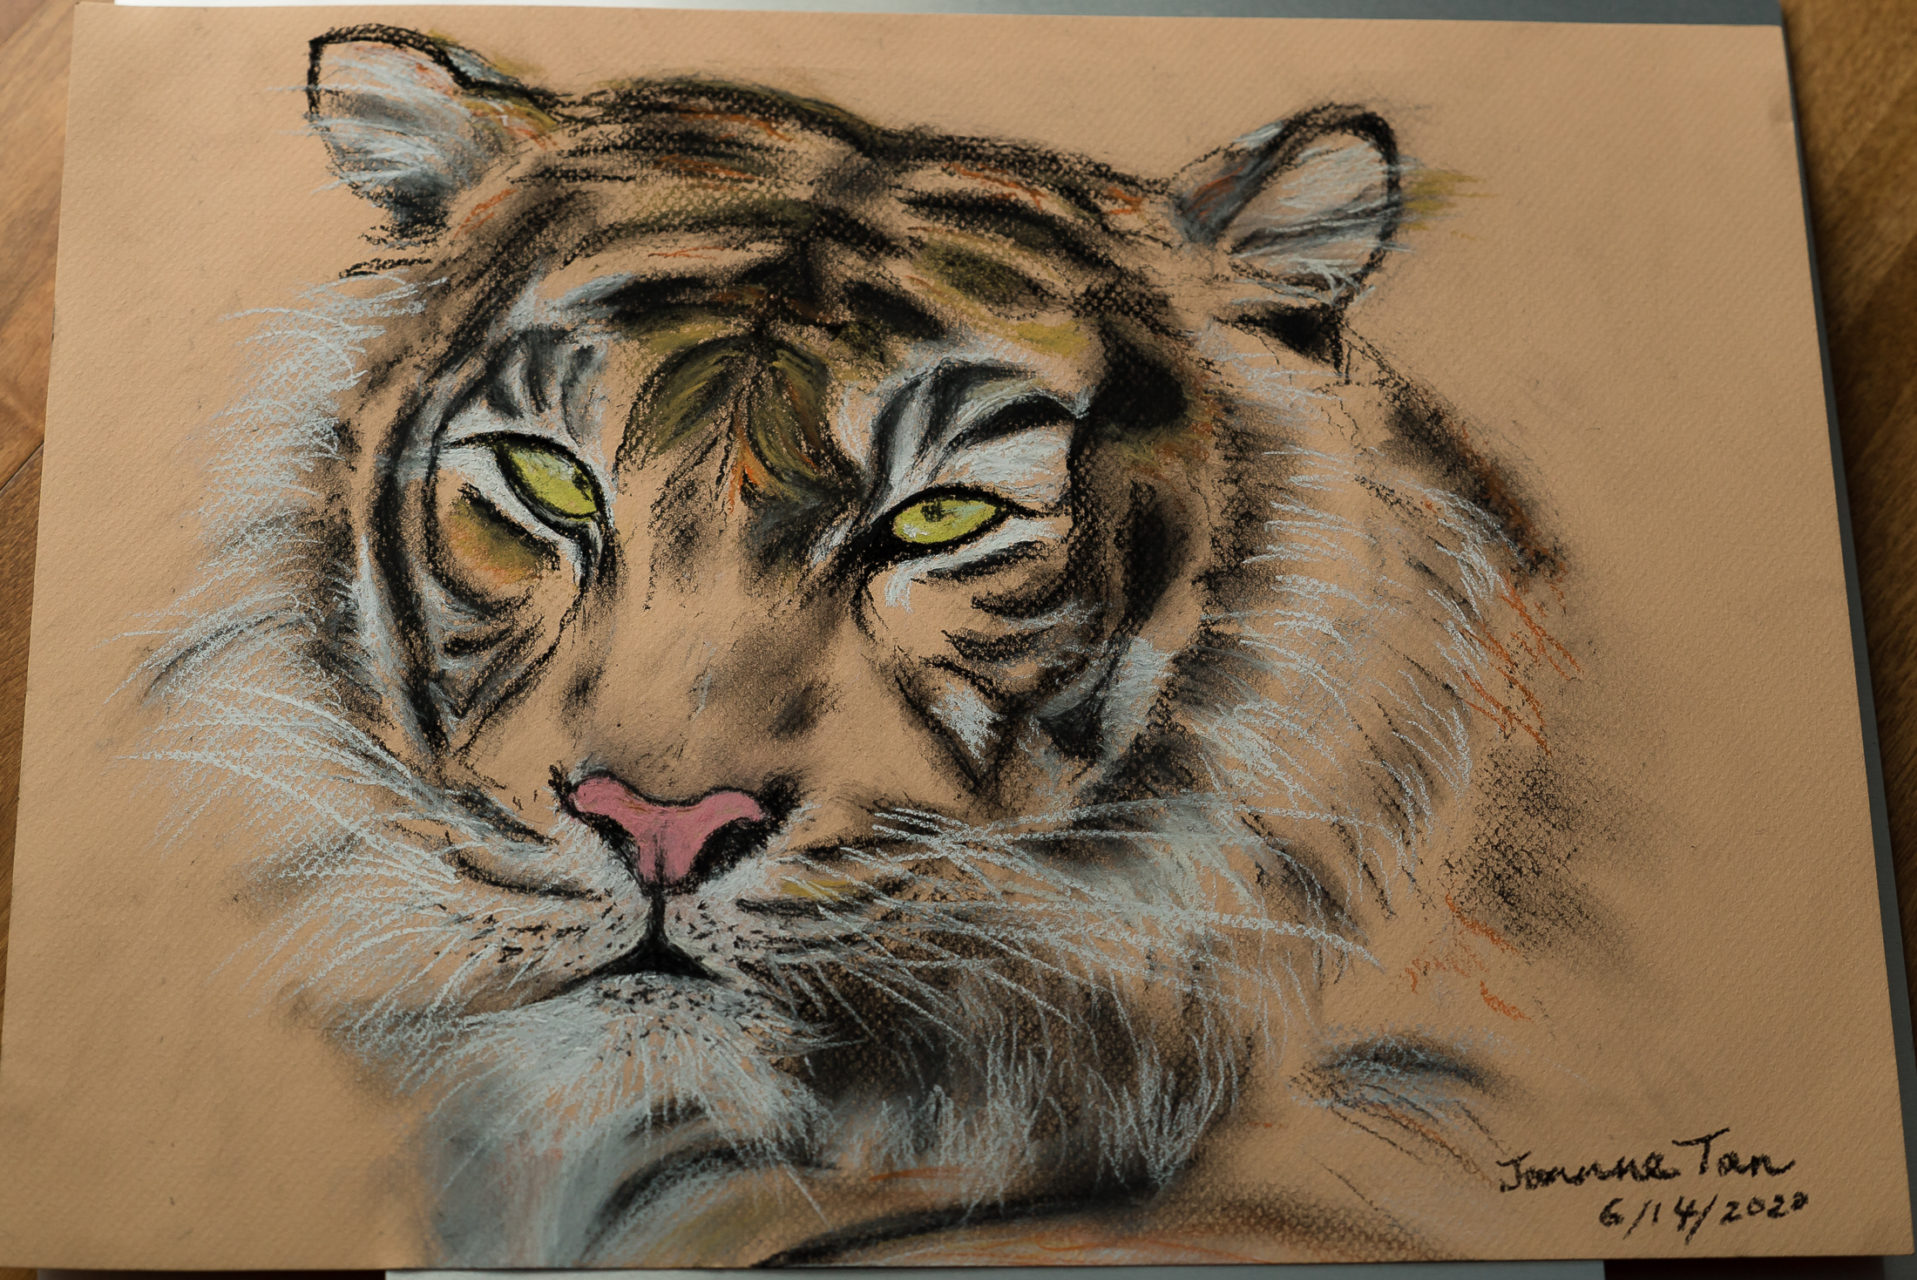 It took me a whole day to paint this from #pastel from a #photo. I think I got that #fierce gaze. What a magnificent creature.

It has been submitted to the #DeYoung Open for exhibit and sale along with "Lion #1"